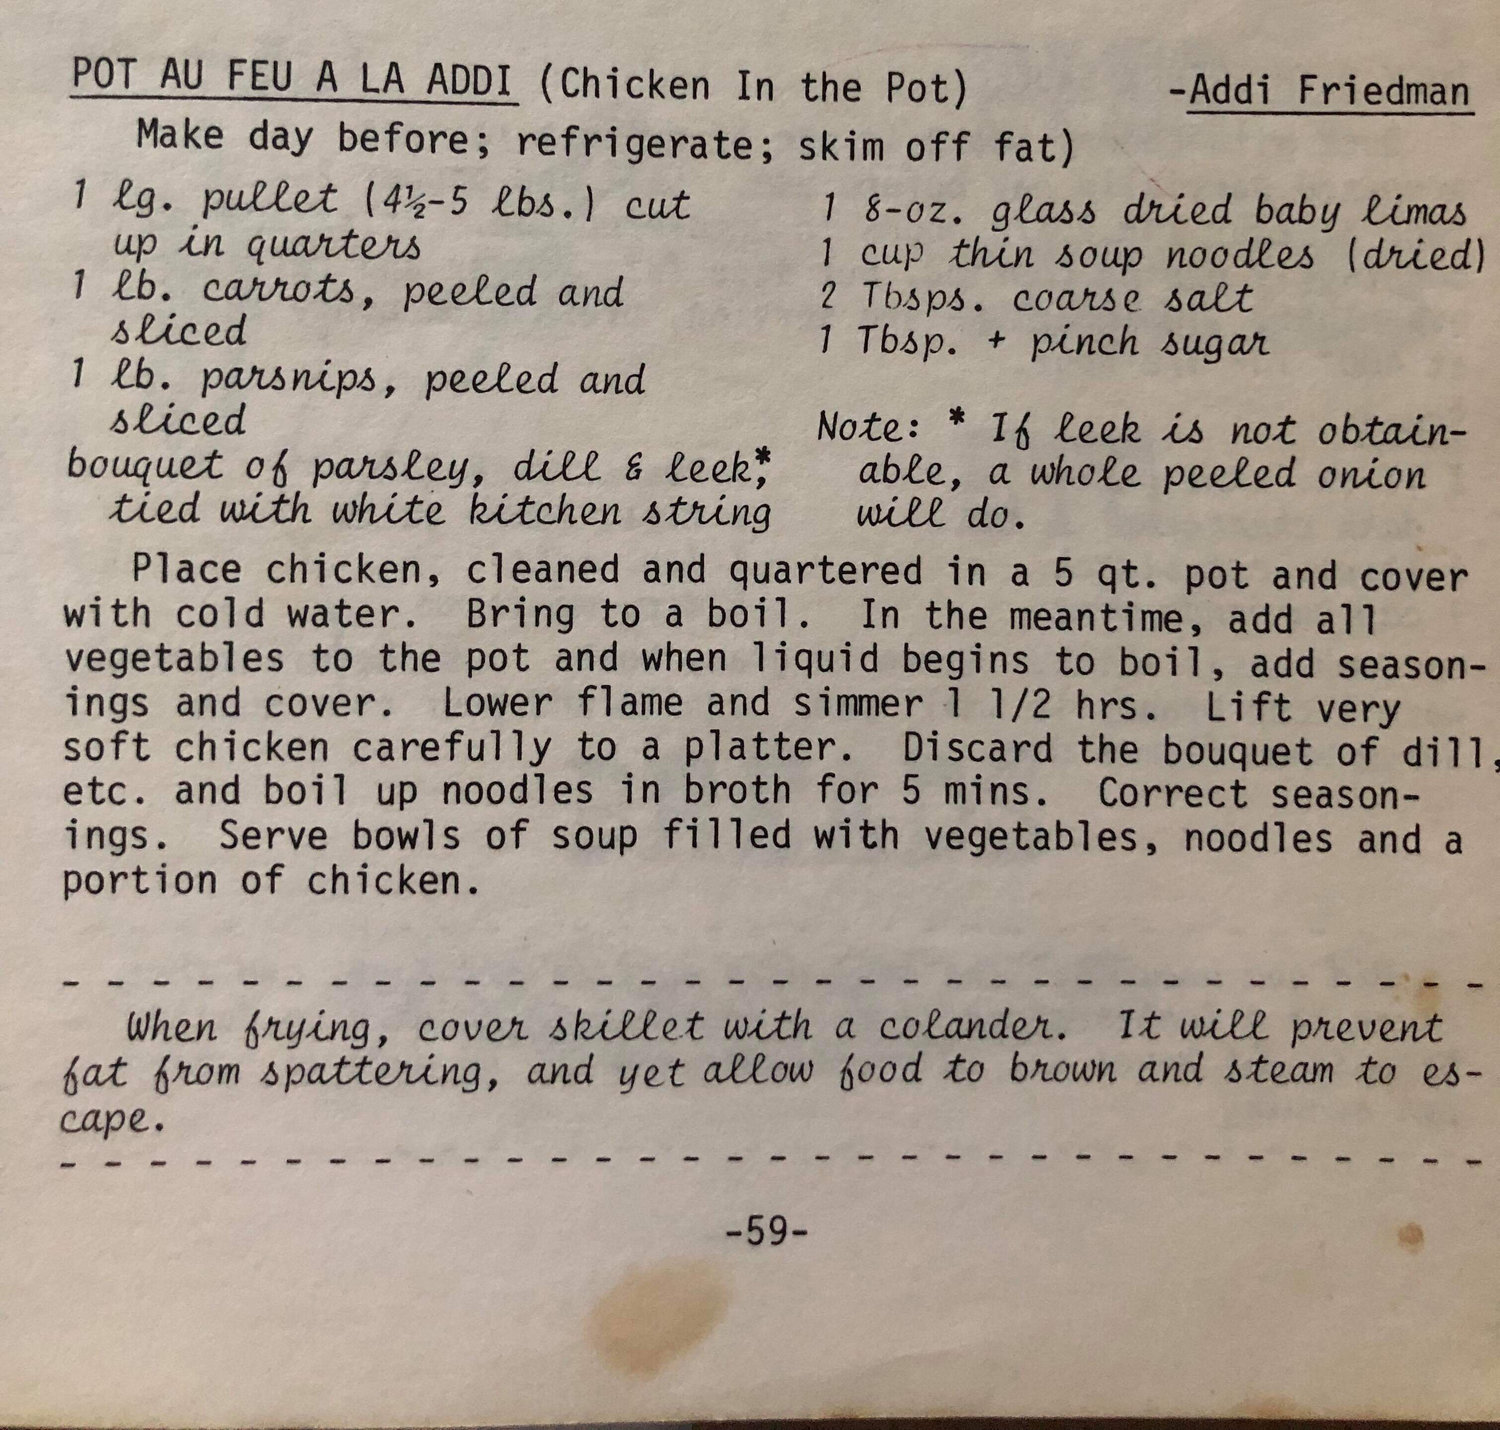 Adelaide Friedman's recipe for Pot Au Feu La Addi that she contributed to a Temple Hillel collection of homemade meals.